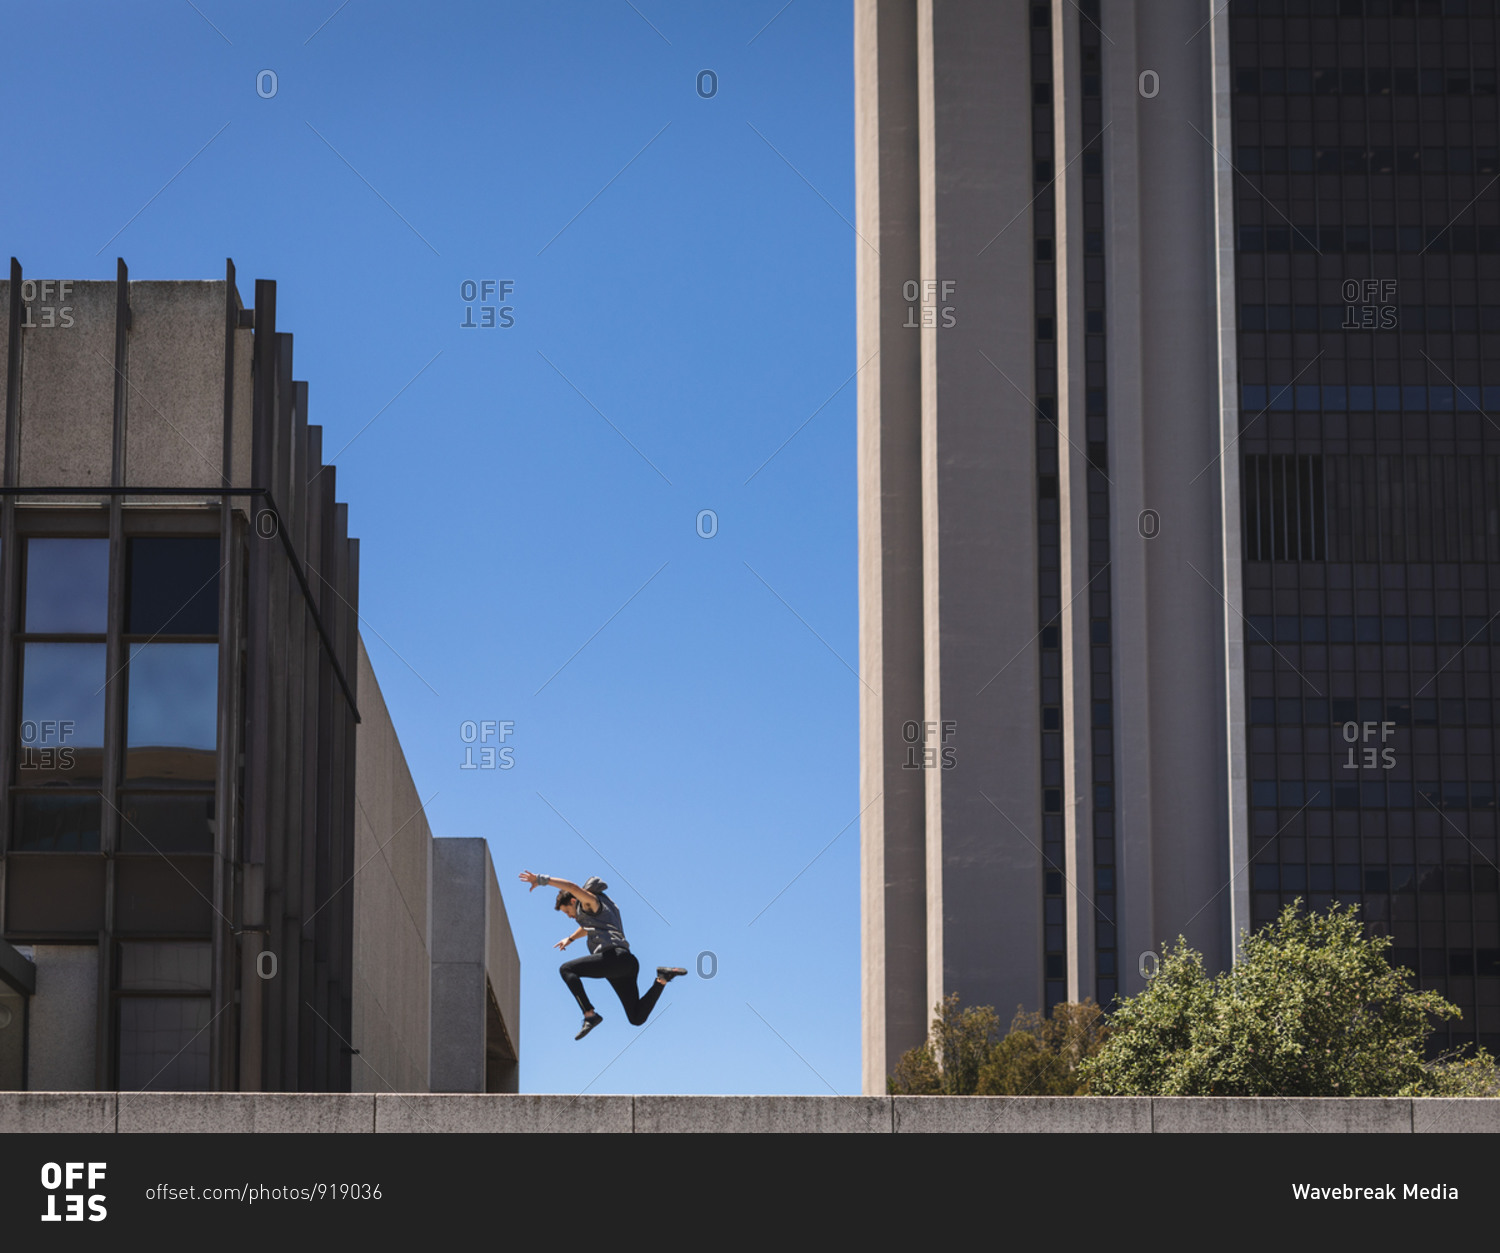 Side view of a Caucasian man practicing parkour by the building in a city on a sunny day, jumping up between modern buildings.